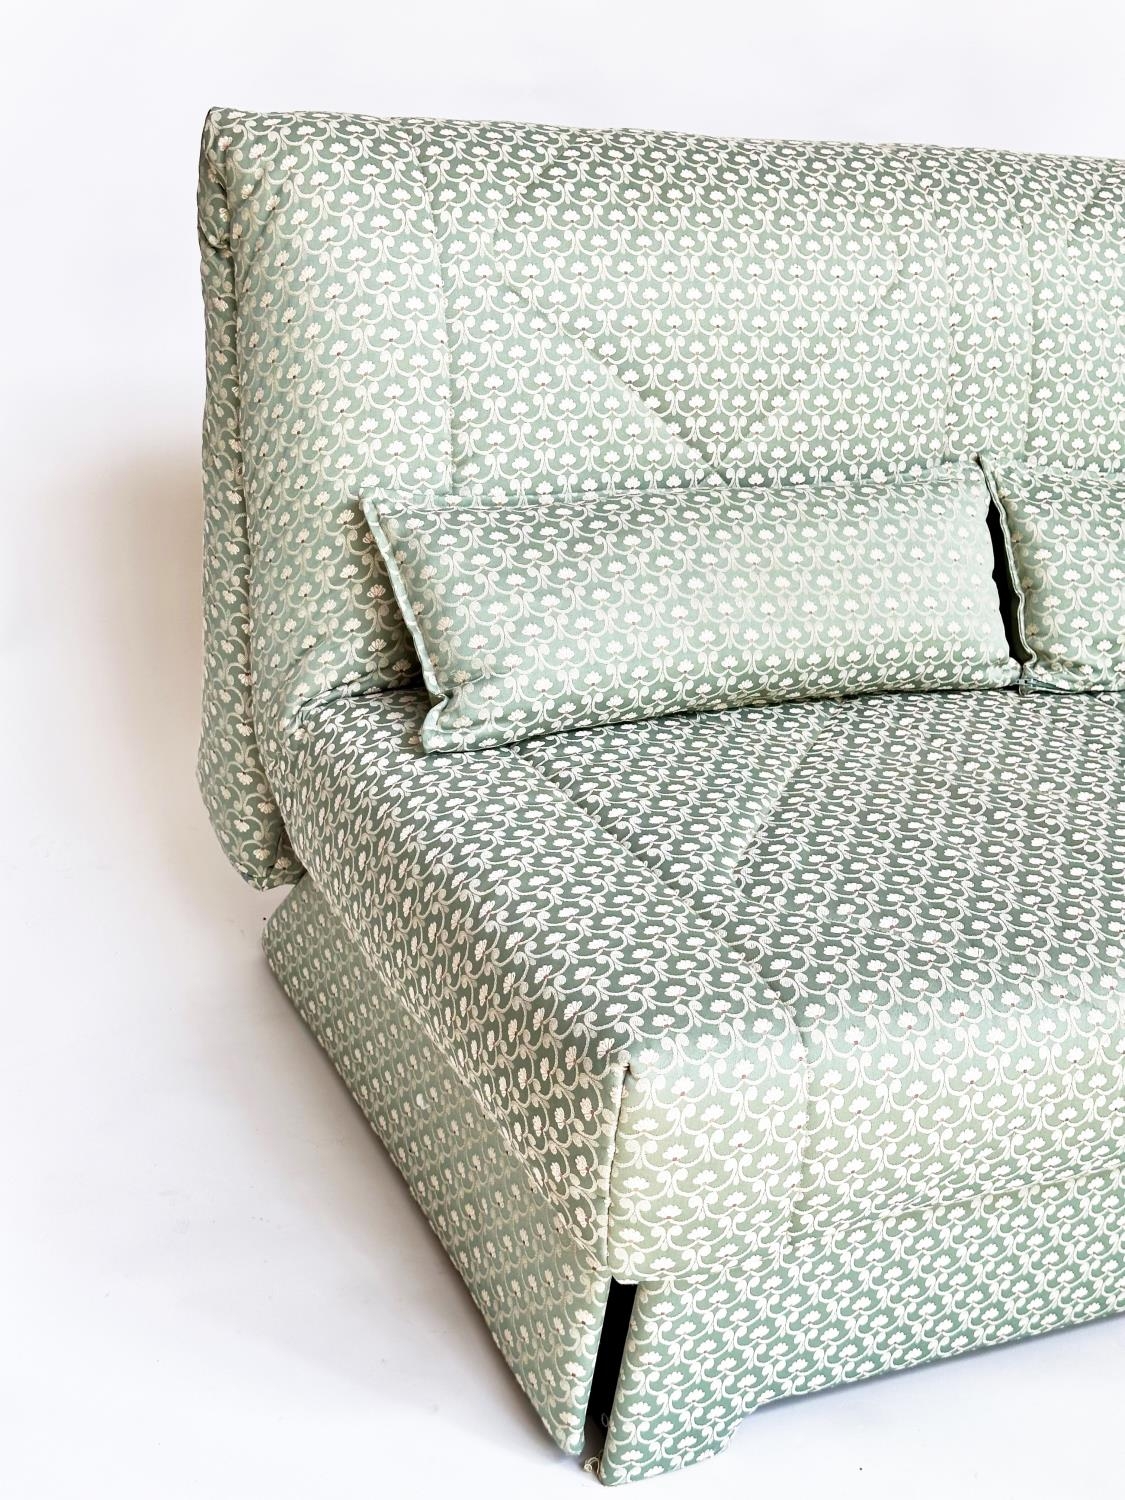 SOFA BED, geometric print upholstered with cushion, transferring to bed, 142cm W (180cm extended). - Image 3 of 8